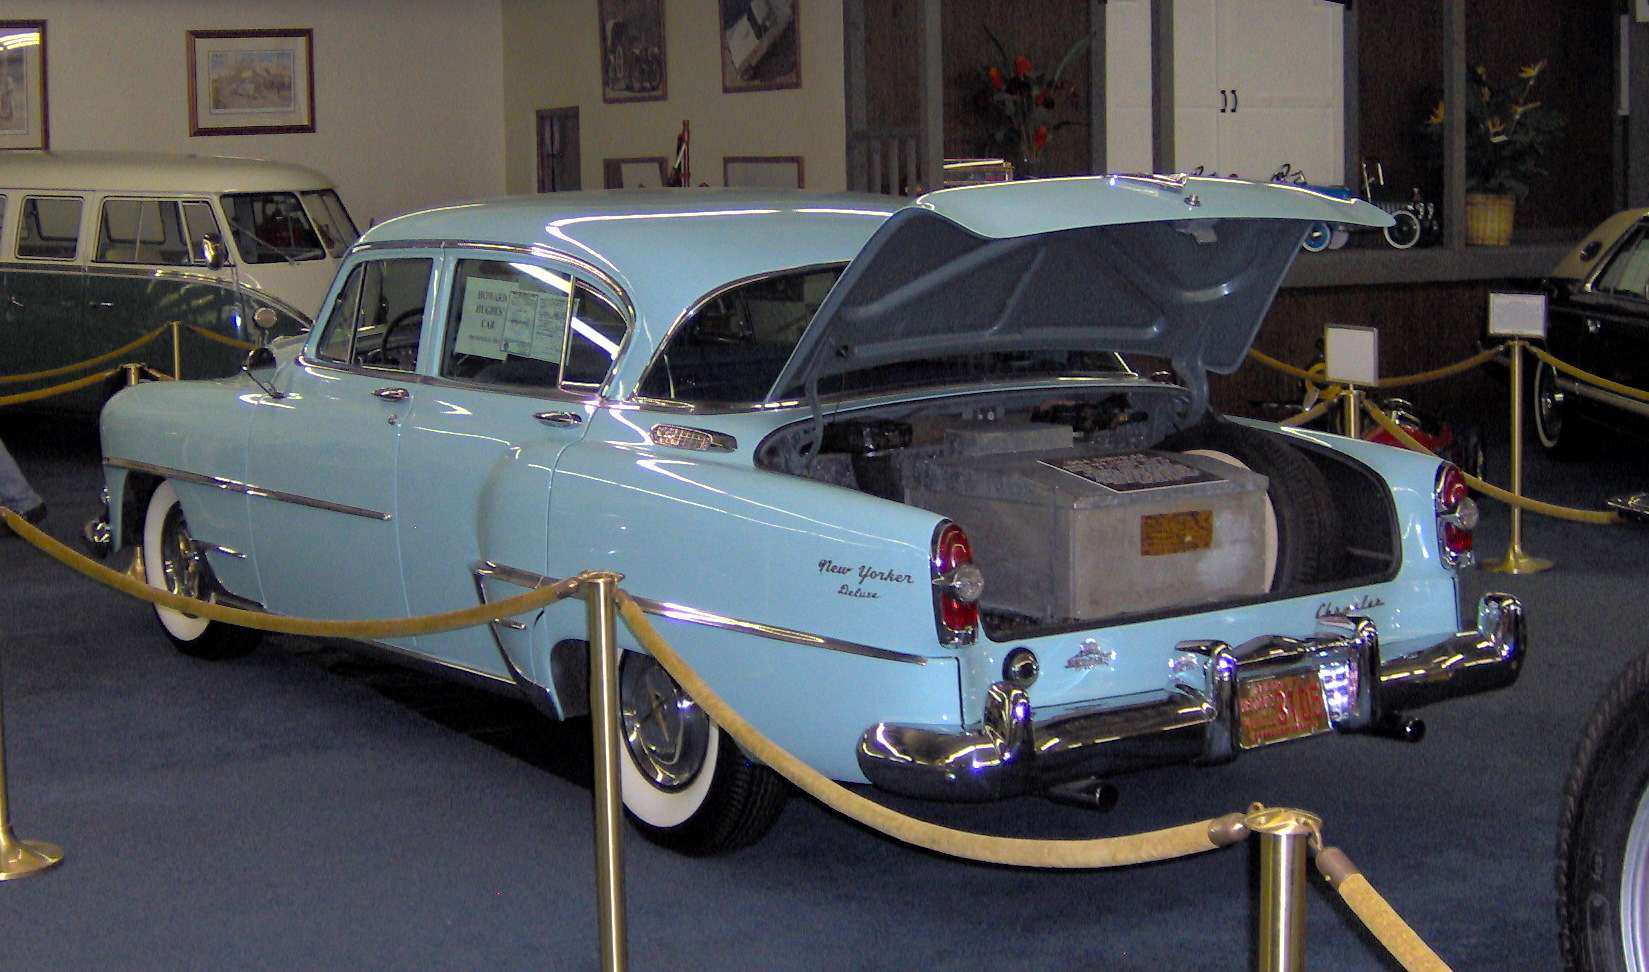 Hughes had this 1954 Chrysler New Yorker equipped with an aircraft-grade air filtration system that took up the entire trunk.